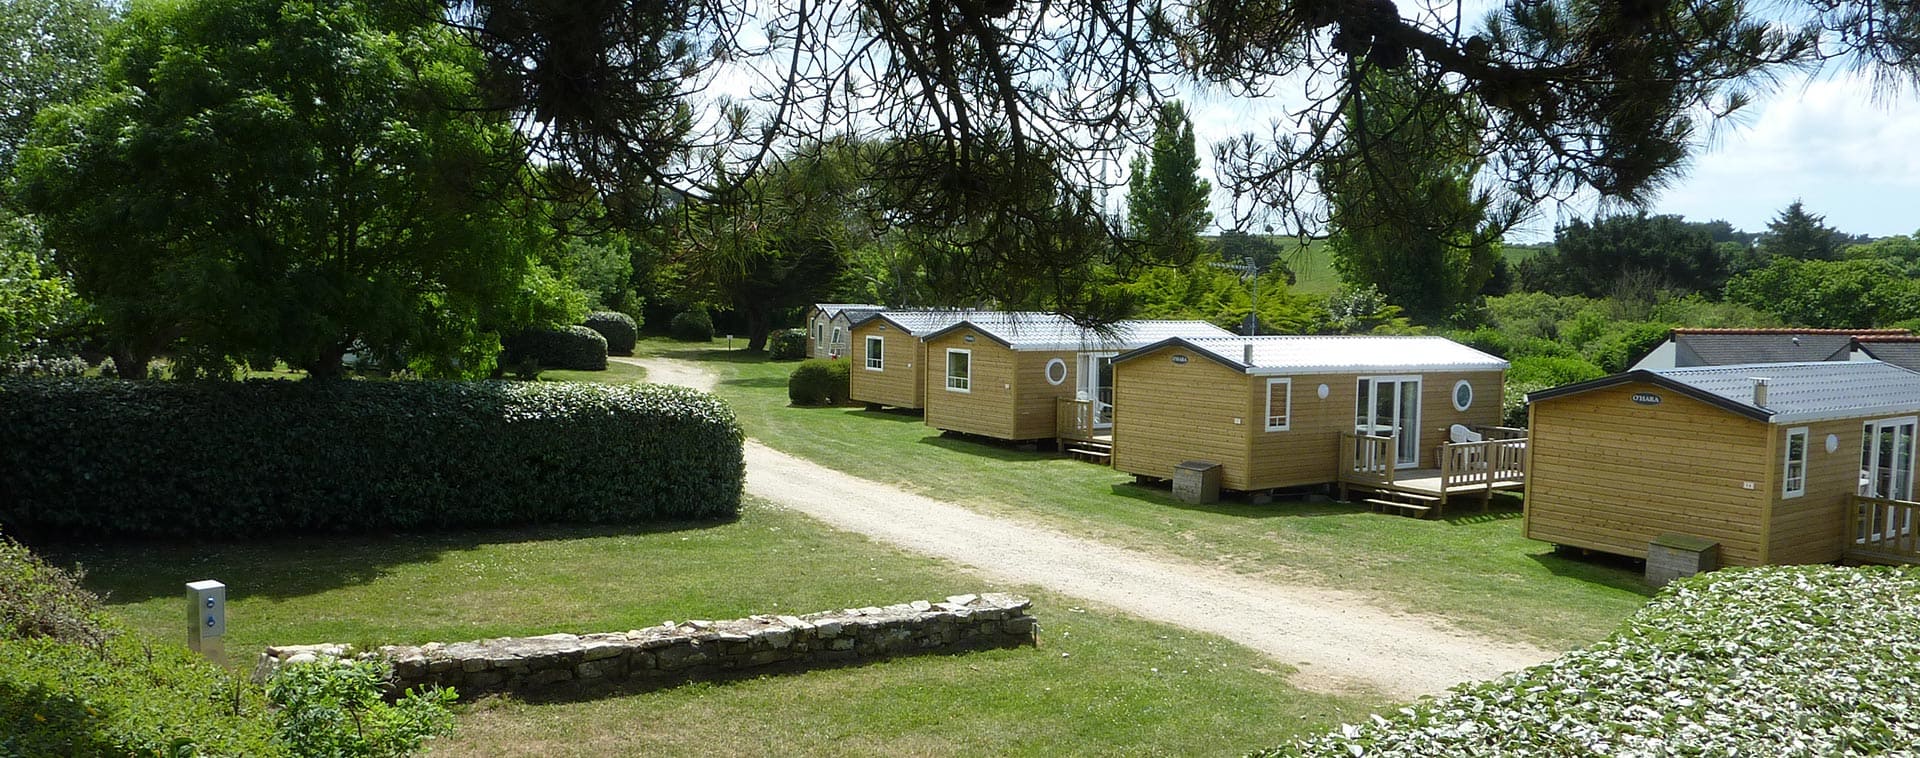 Campsite Pors Peron, mobile-home rentals in Brittany